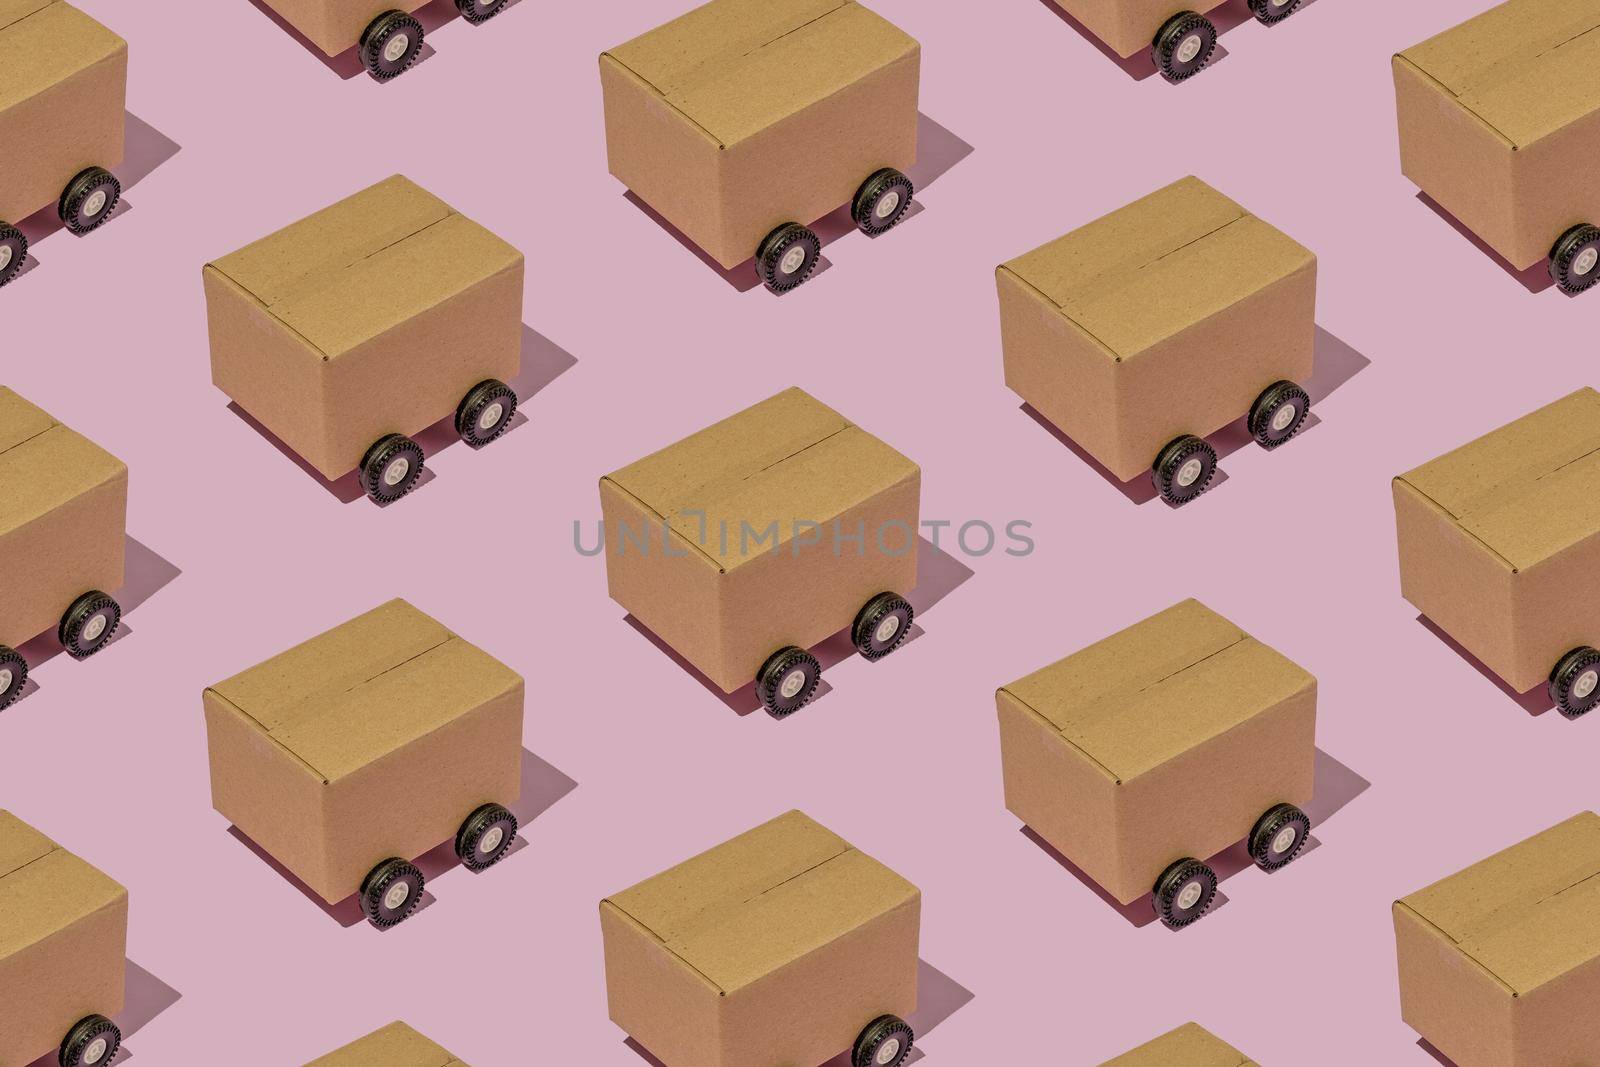 Cardboard boxes on wheels like trucks carry parcels and make deliveries.  by sergii_gnatiuk